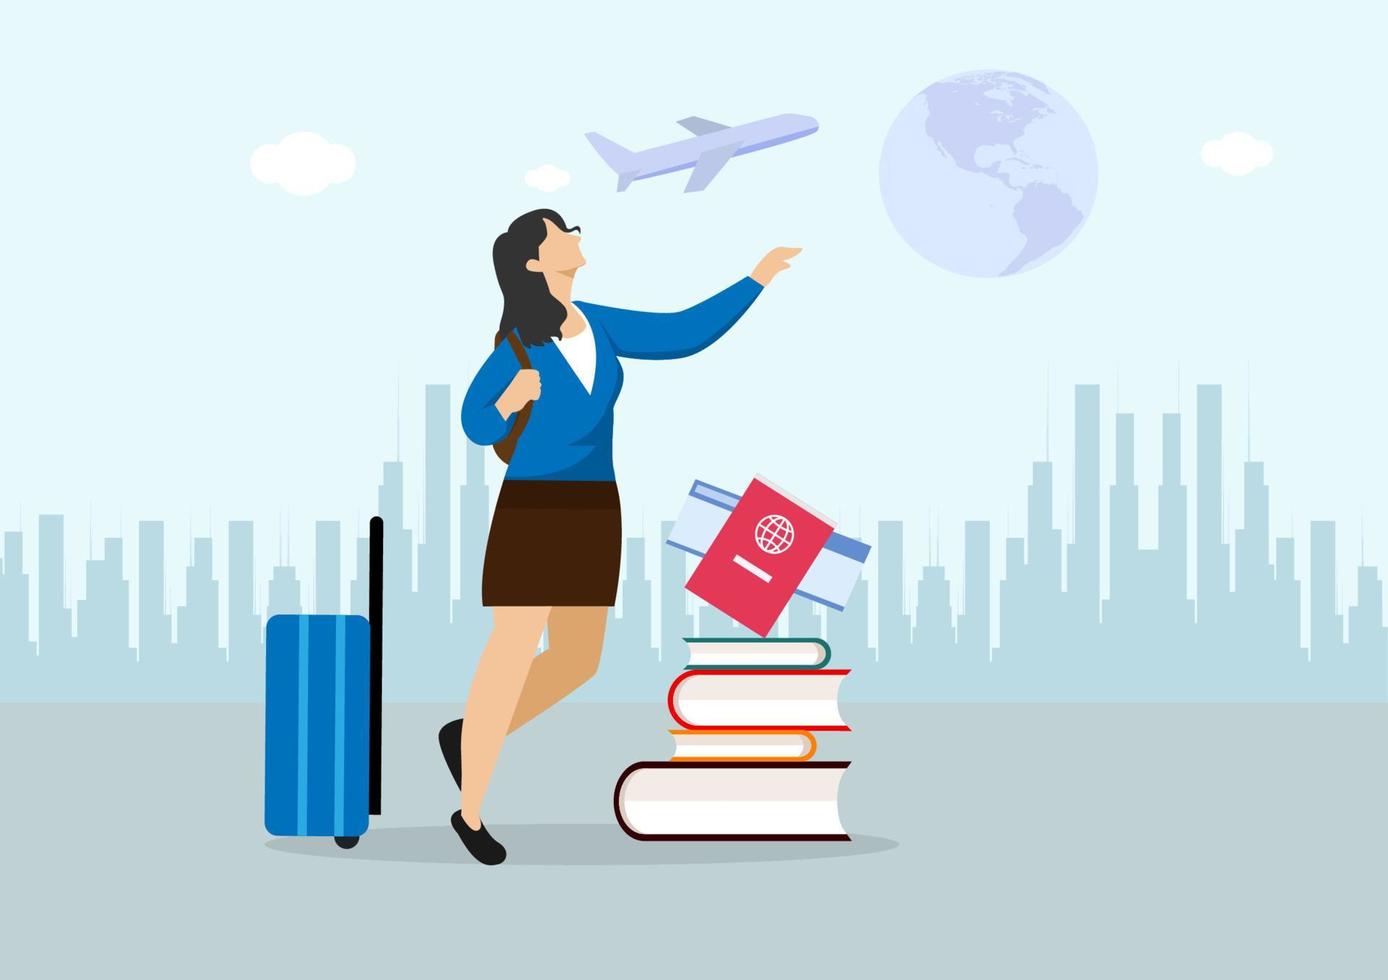 educational travel ideas for schoolchildren in uniform and luggage Passport symbols, tickets, books, planes, travel abroad. flat style vector illustration